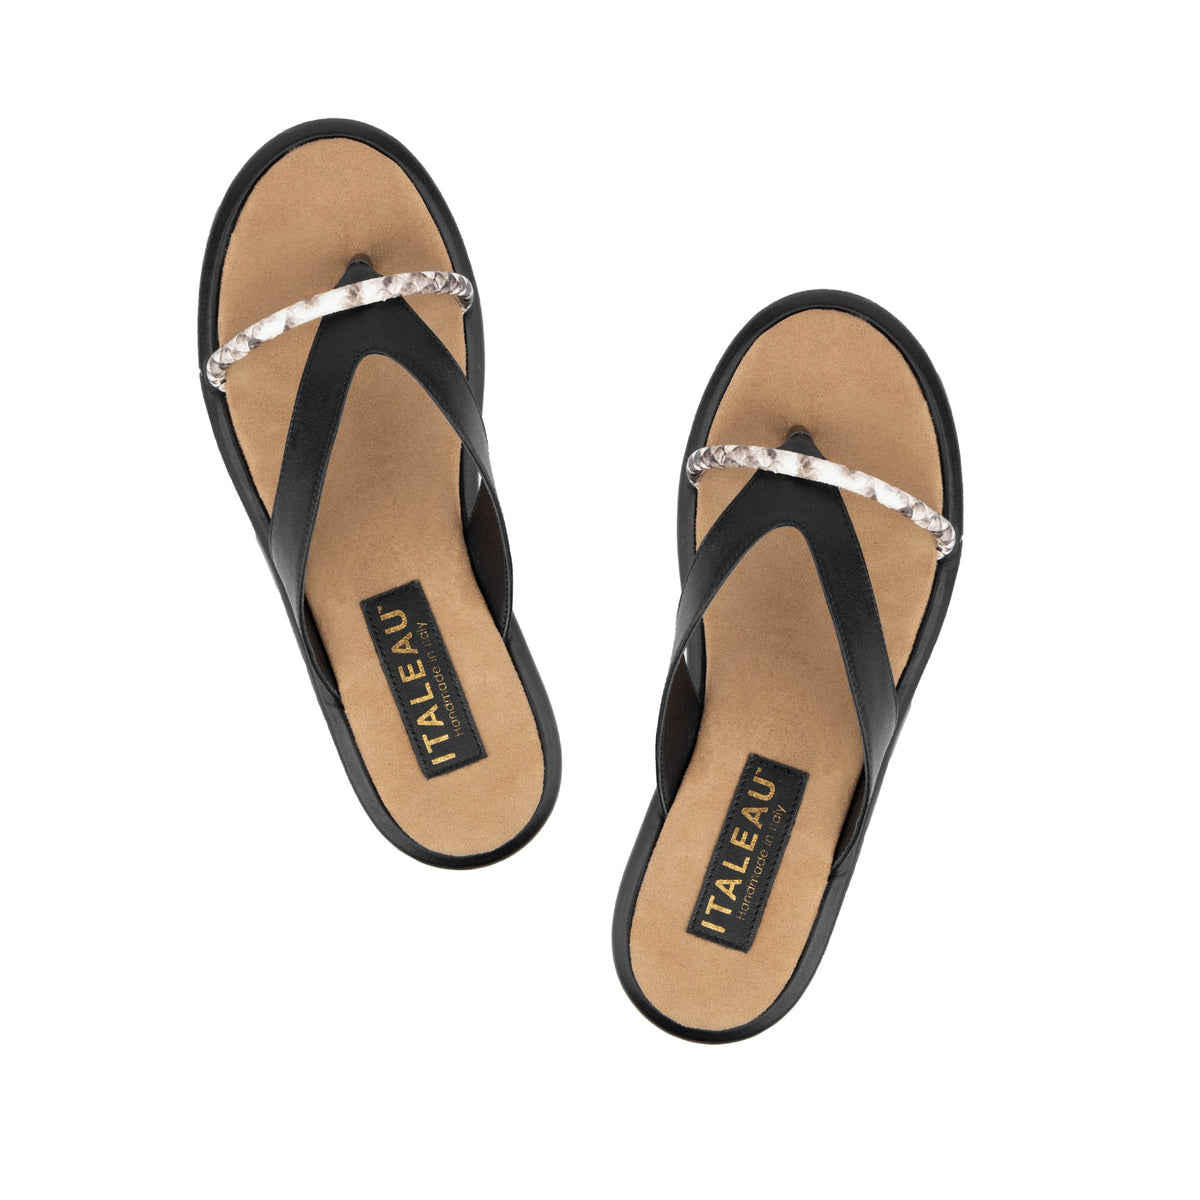 Italeau Zabri sandals are comfortable, versatile and handmade in Italy